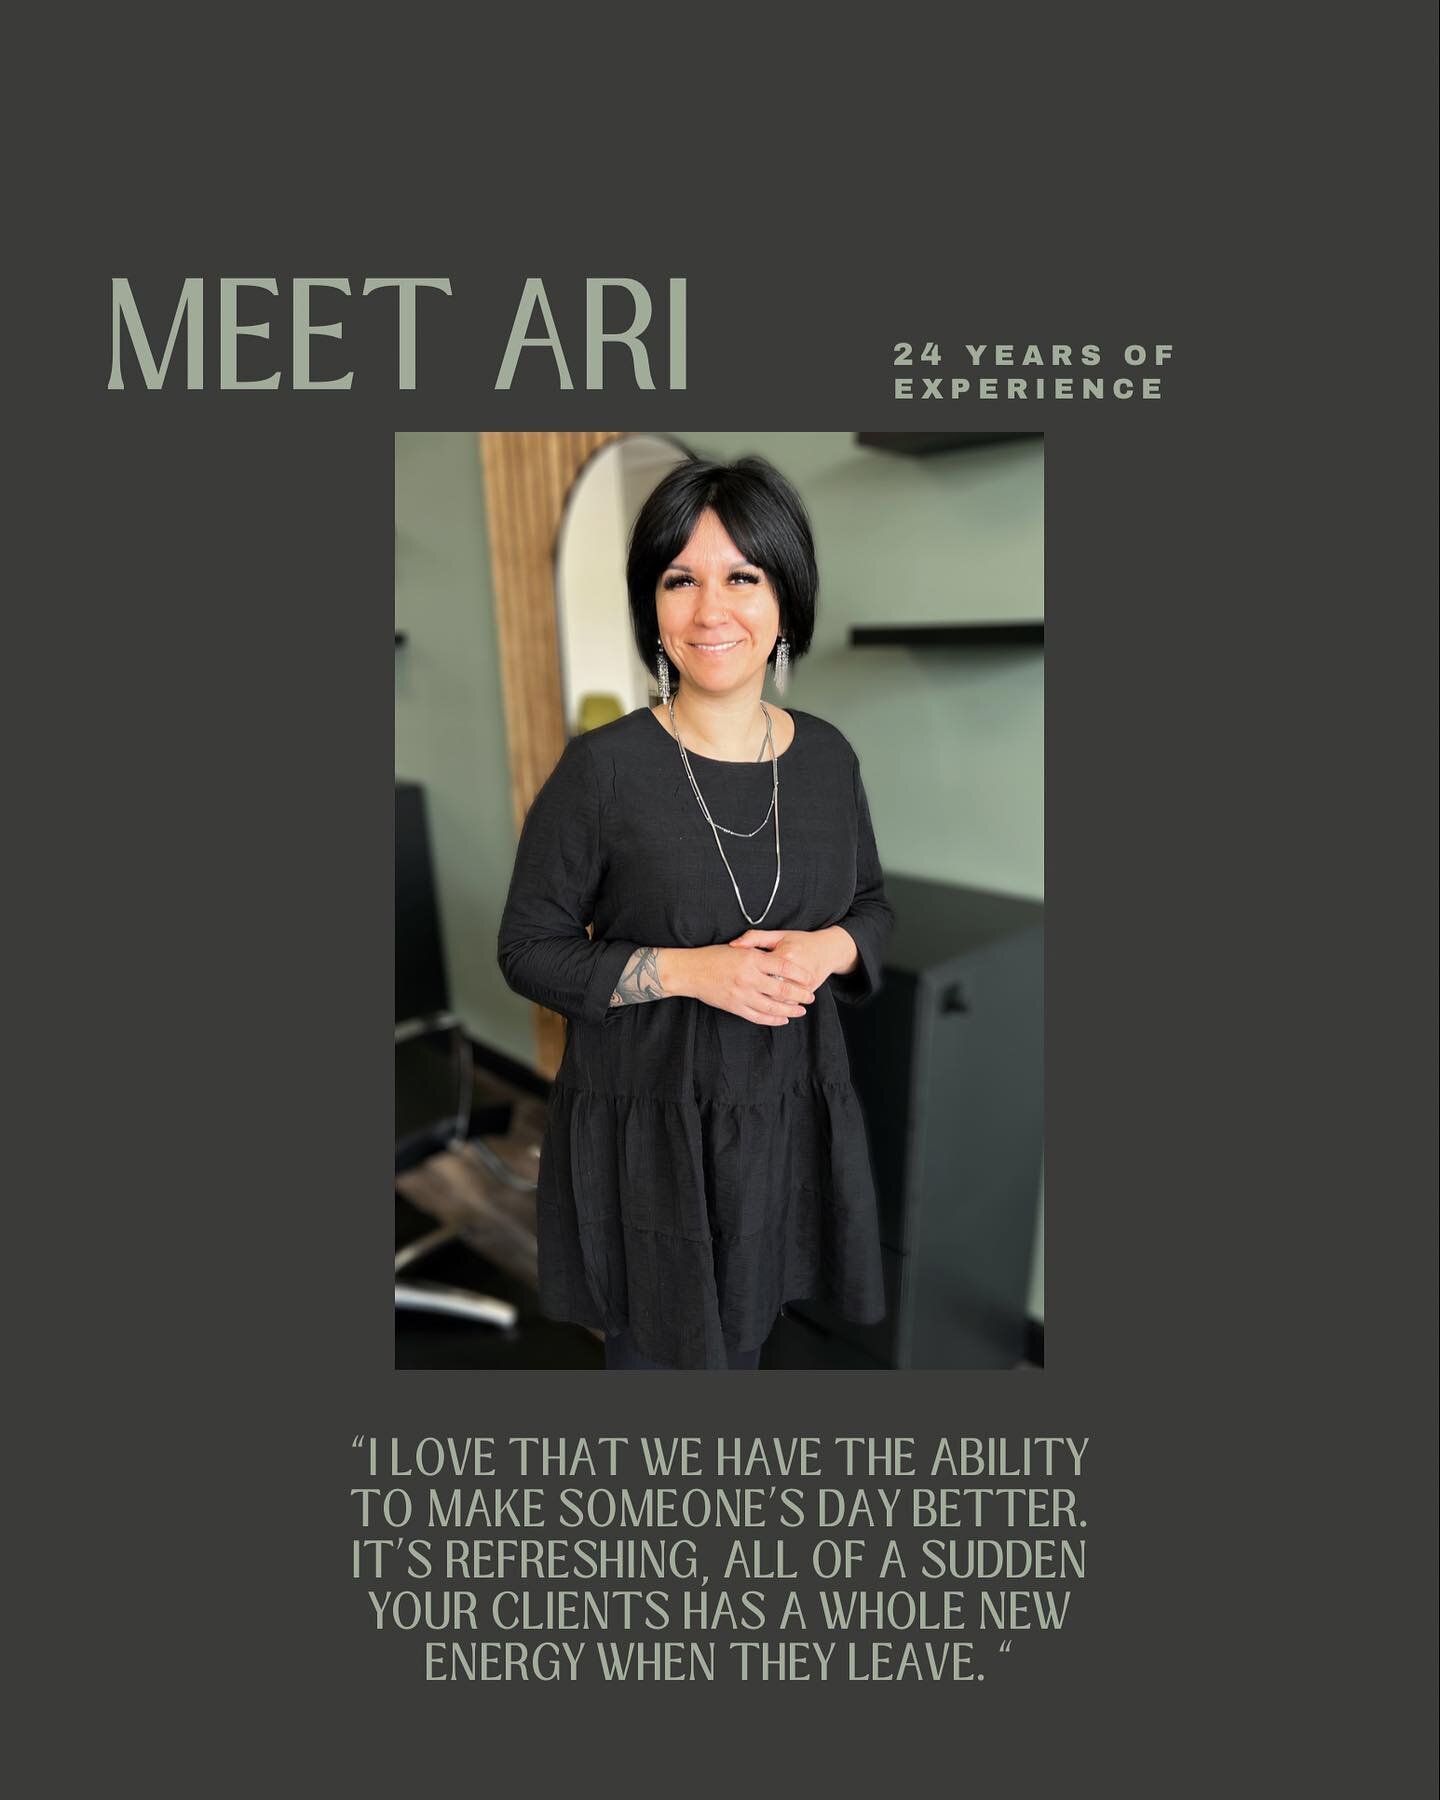 ✨MEET ARI ✨

I&rsquo;m still pinching myself she joined the team! One of the funniest, nicest people I&rsquo;ve met! 
As putting together a team, I&rsquo;ve wanted to be thoughtful about it and hire people that really mesh together, and lucky for me,